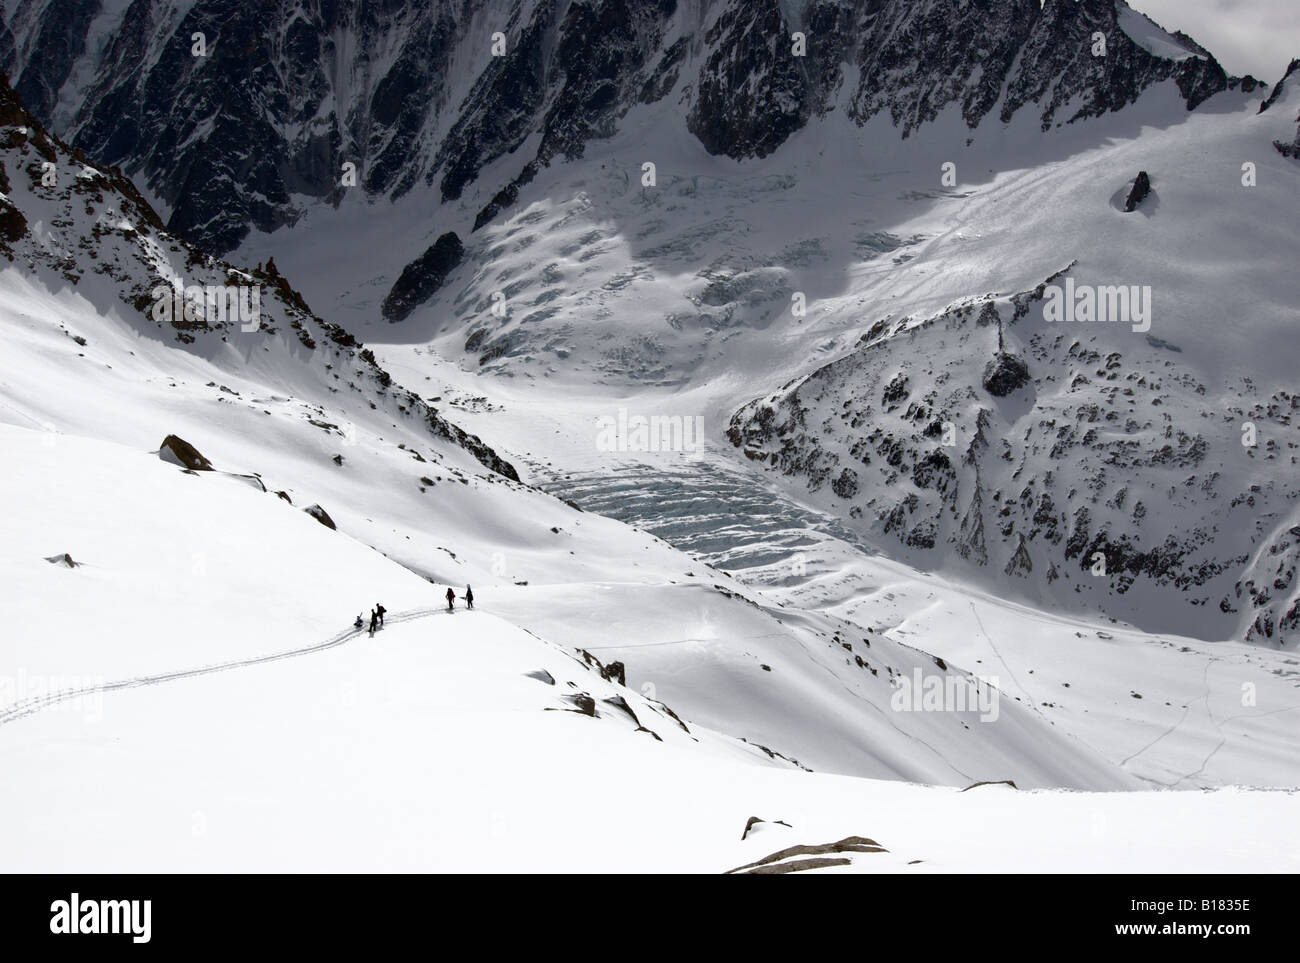 Ski tourers pausing for a rest during ascent from Argentiere Glacier towards Col du Passon, Chamonix valley, France Stock Photo